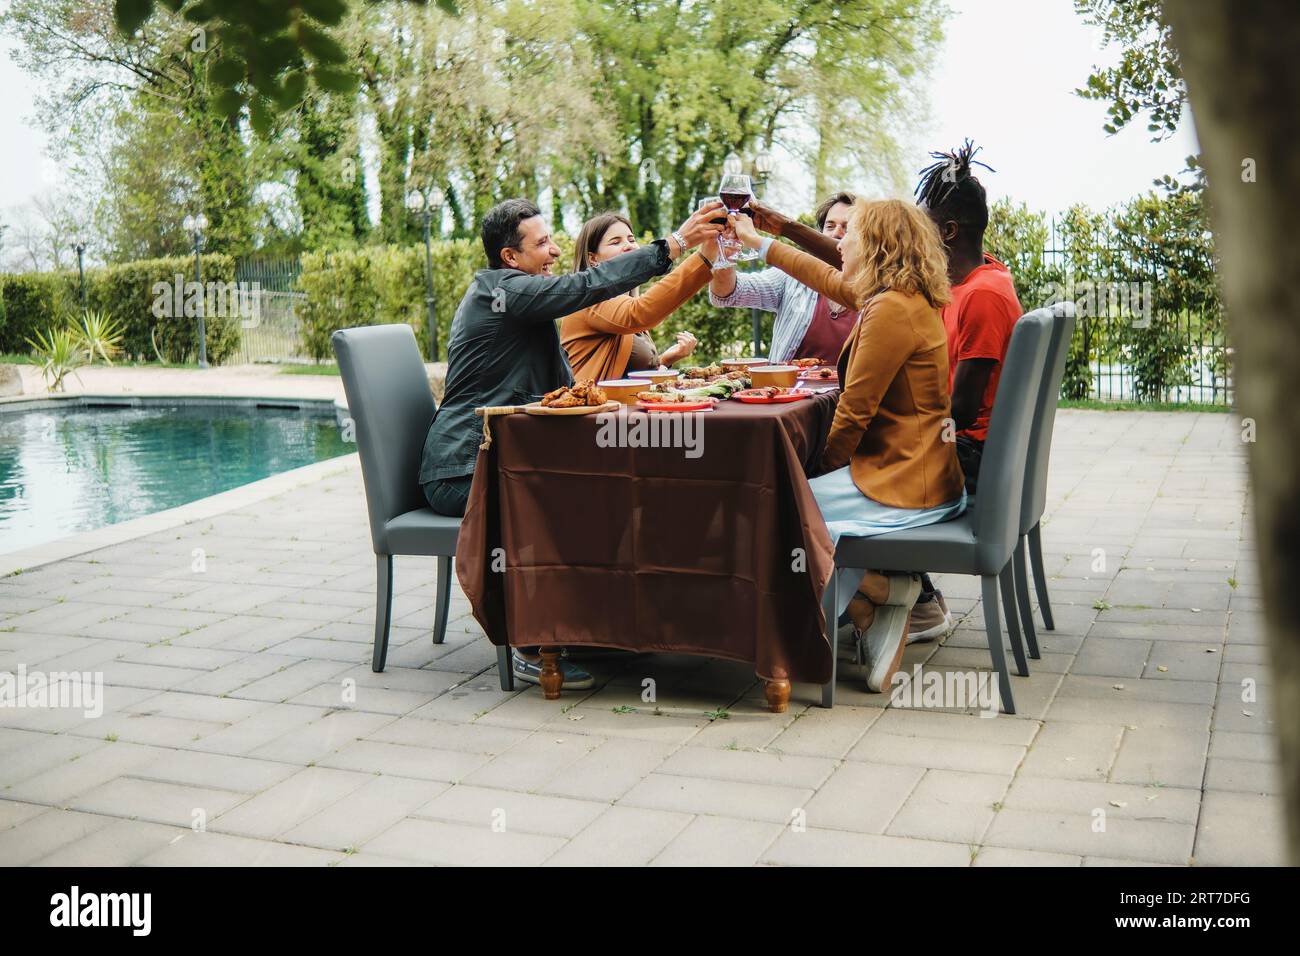 A diverse group of friends, including caucasians and an African individual, toast with wine glasses in a garden courtyard by the pool. They sit togeth Stock Photo